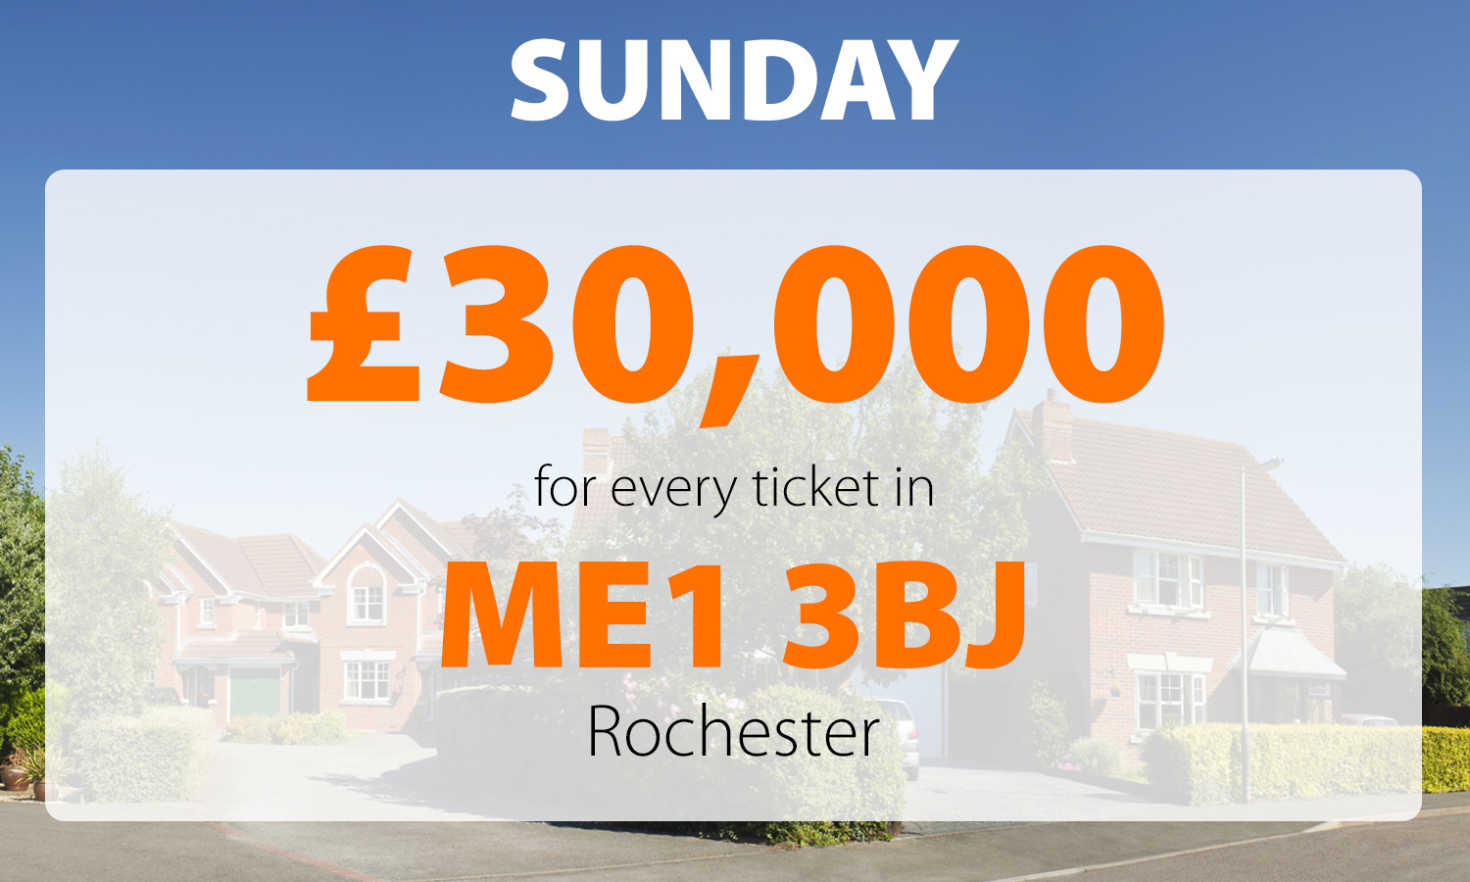 One Rochester player has won a fabulous £30,000 prize this weekend